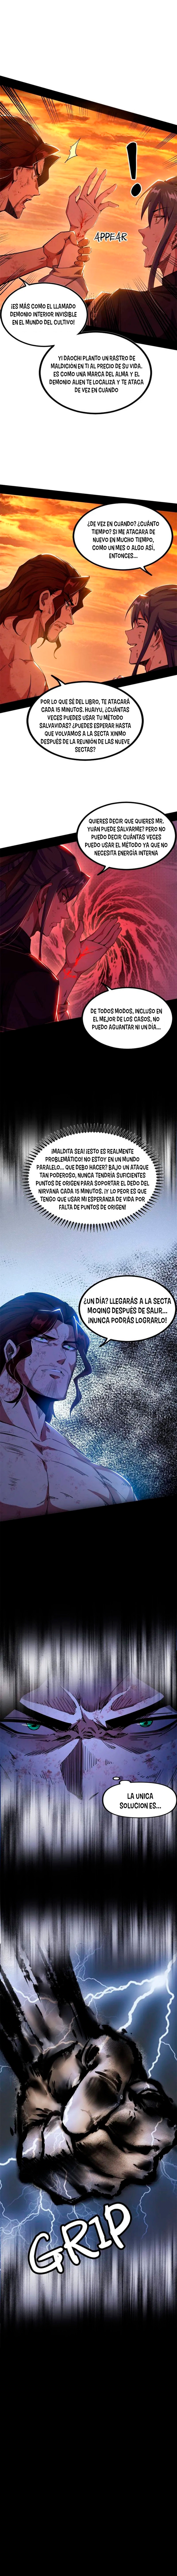 Manga Soy un dios maligno Chapter 310 image number 7